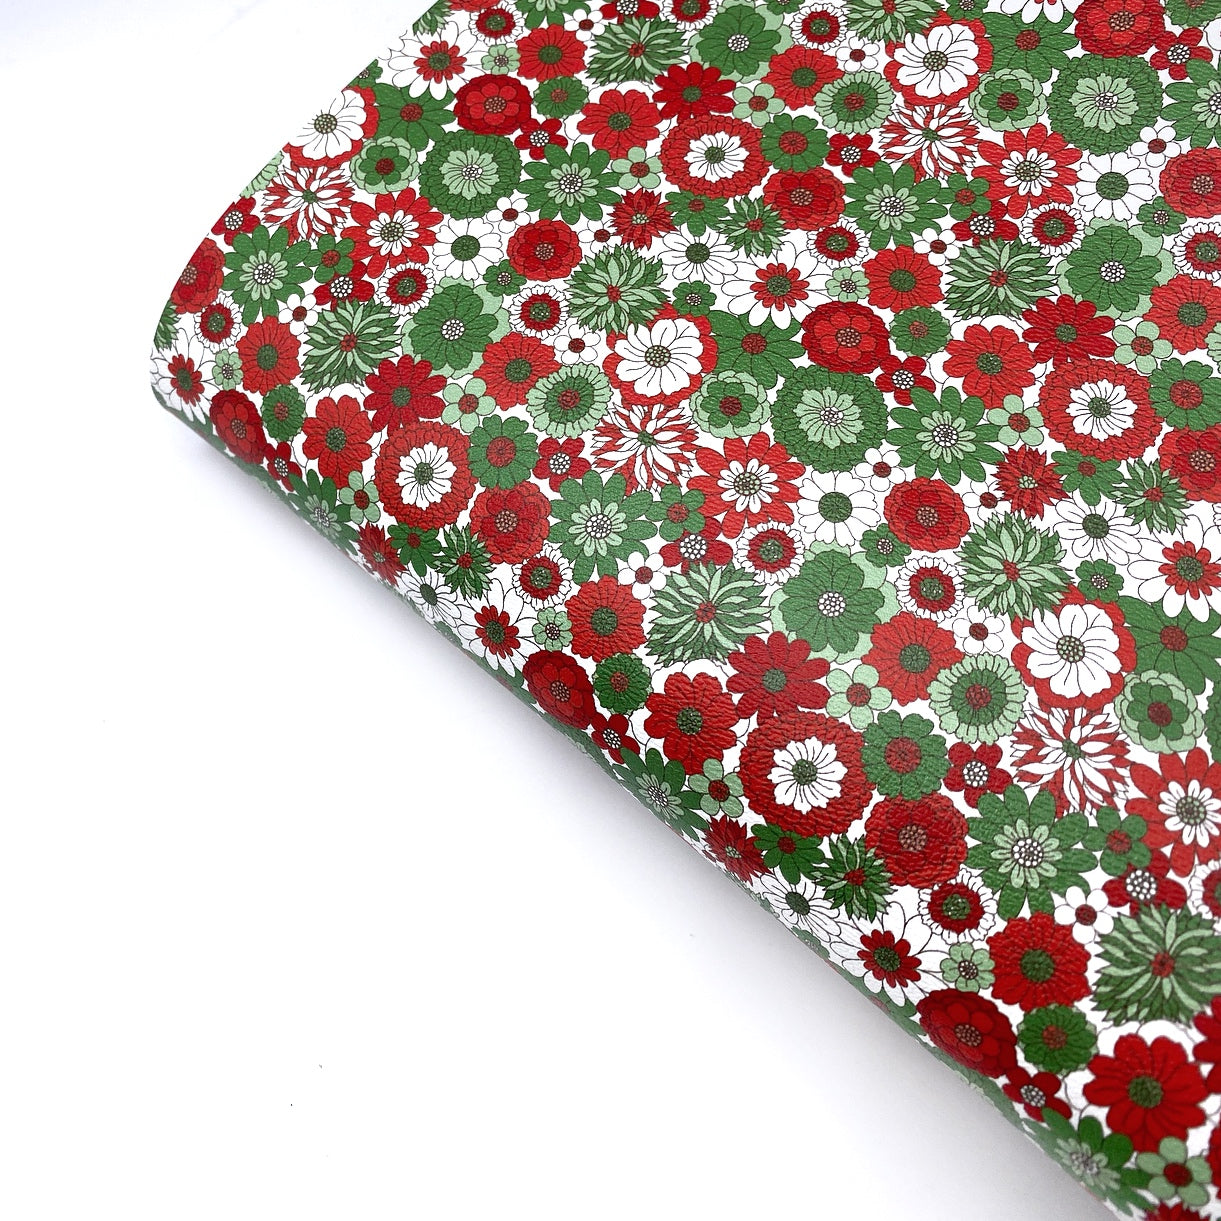 Retro Christmas Blooms Premium Faux Leather Fabric Sheets